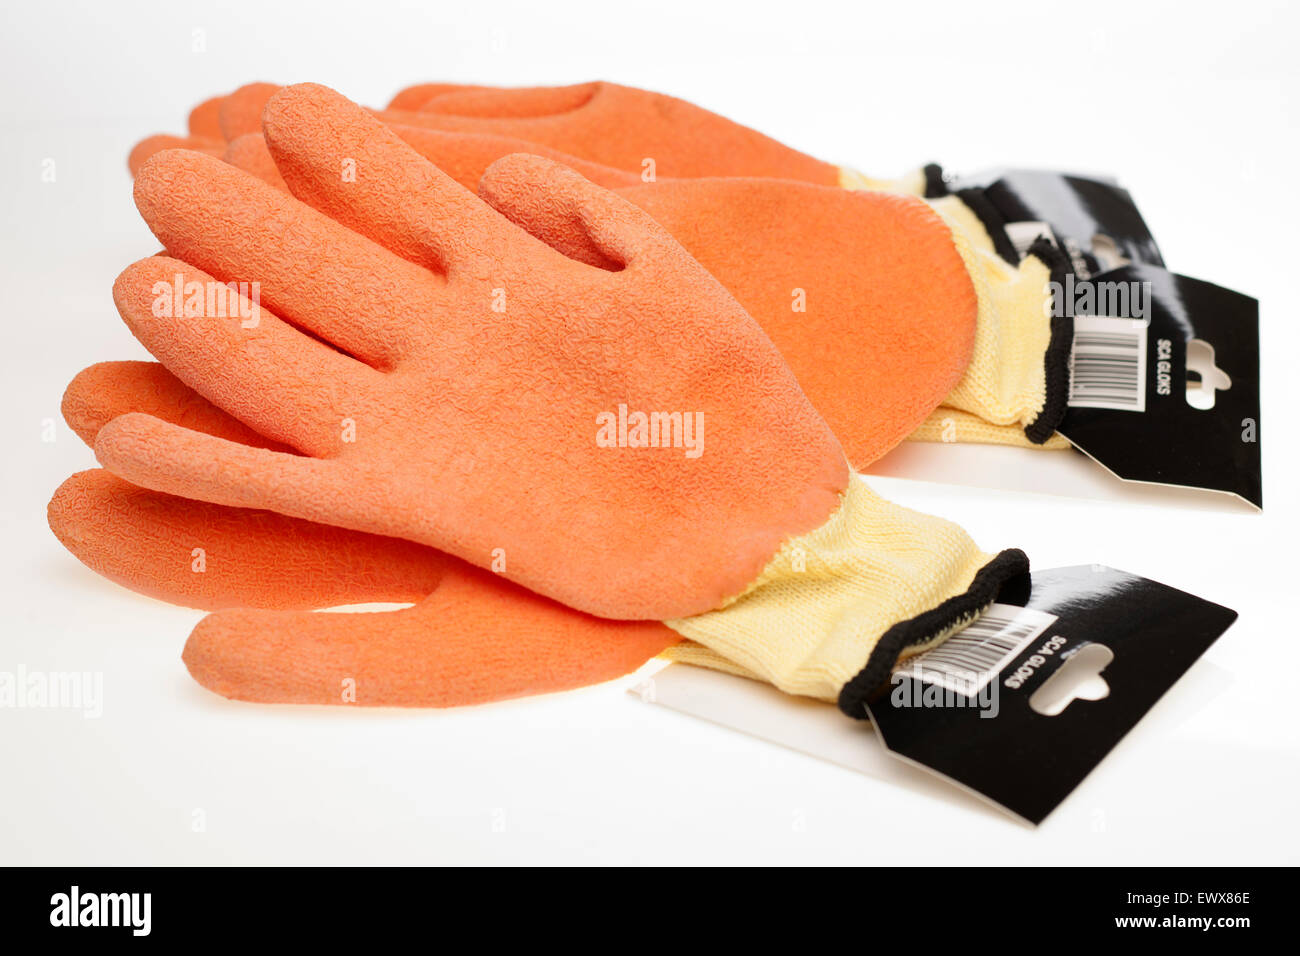 Three pairs of orange and yellow  non slip latex coated and knitted seamless safety wear work gloves Stock Photo